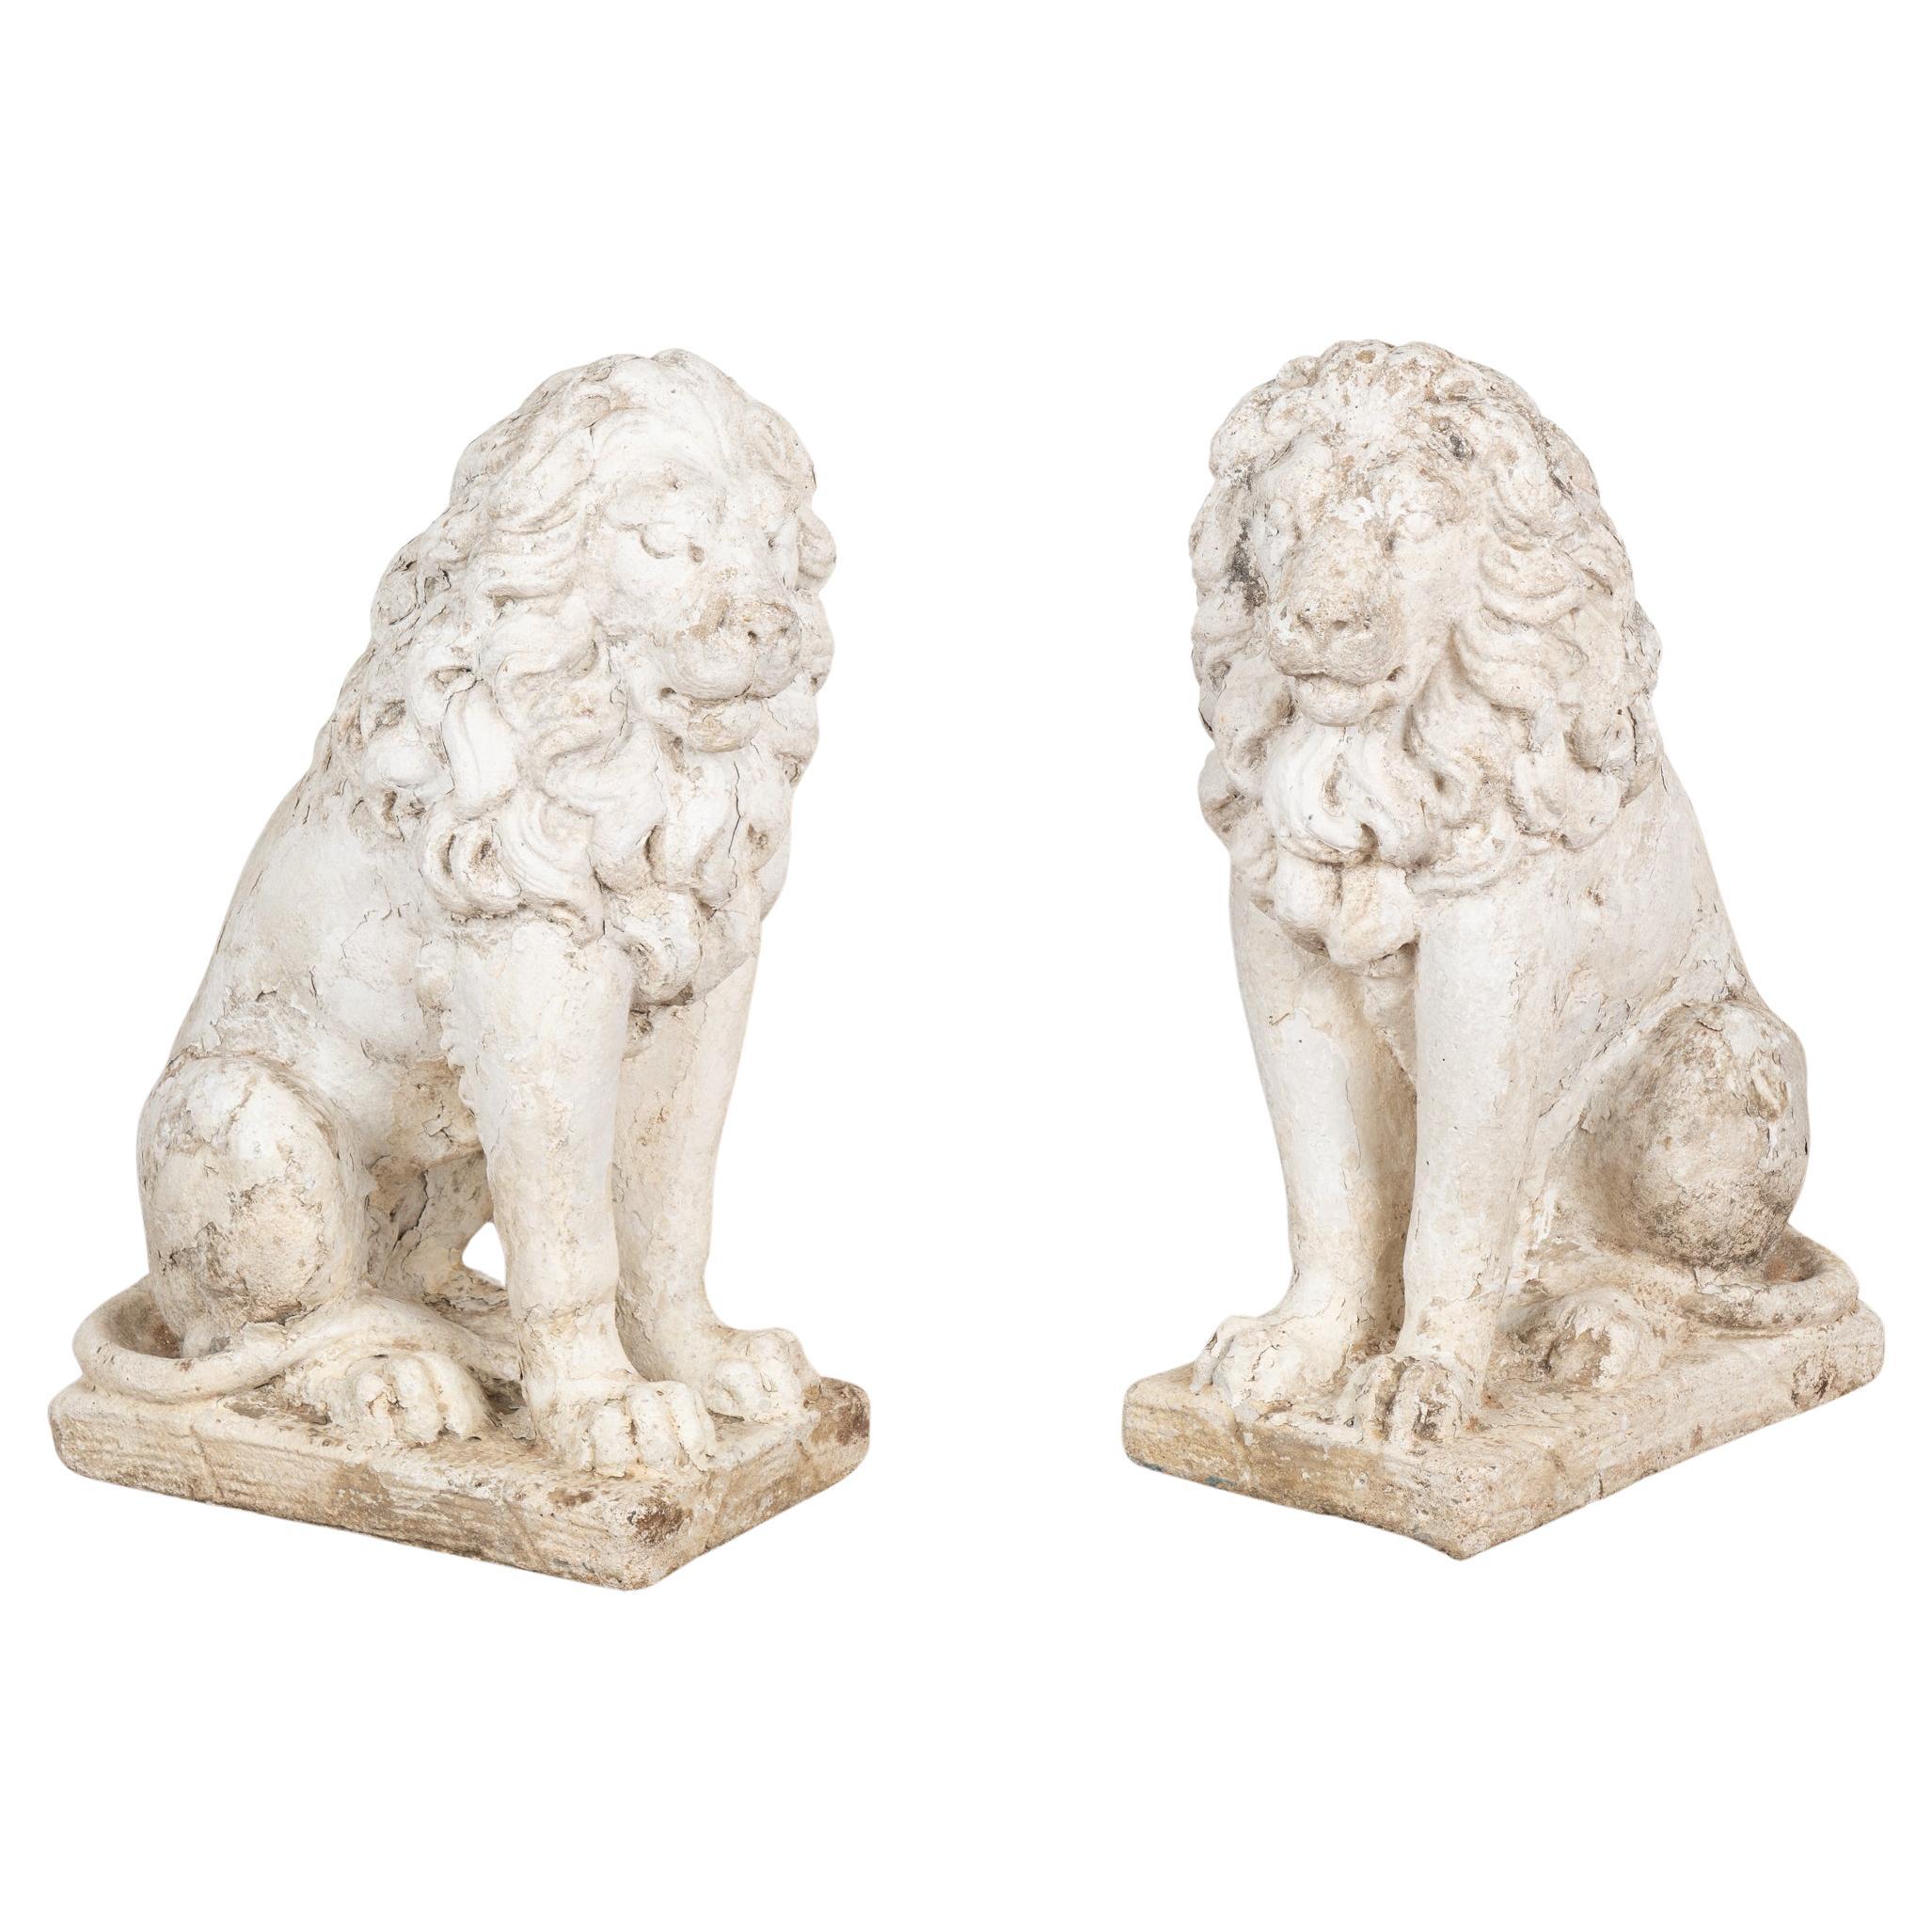 Pair, Carved Lion Garden Statues Painted White, Denmark circa 1920-40